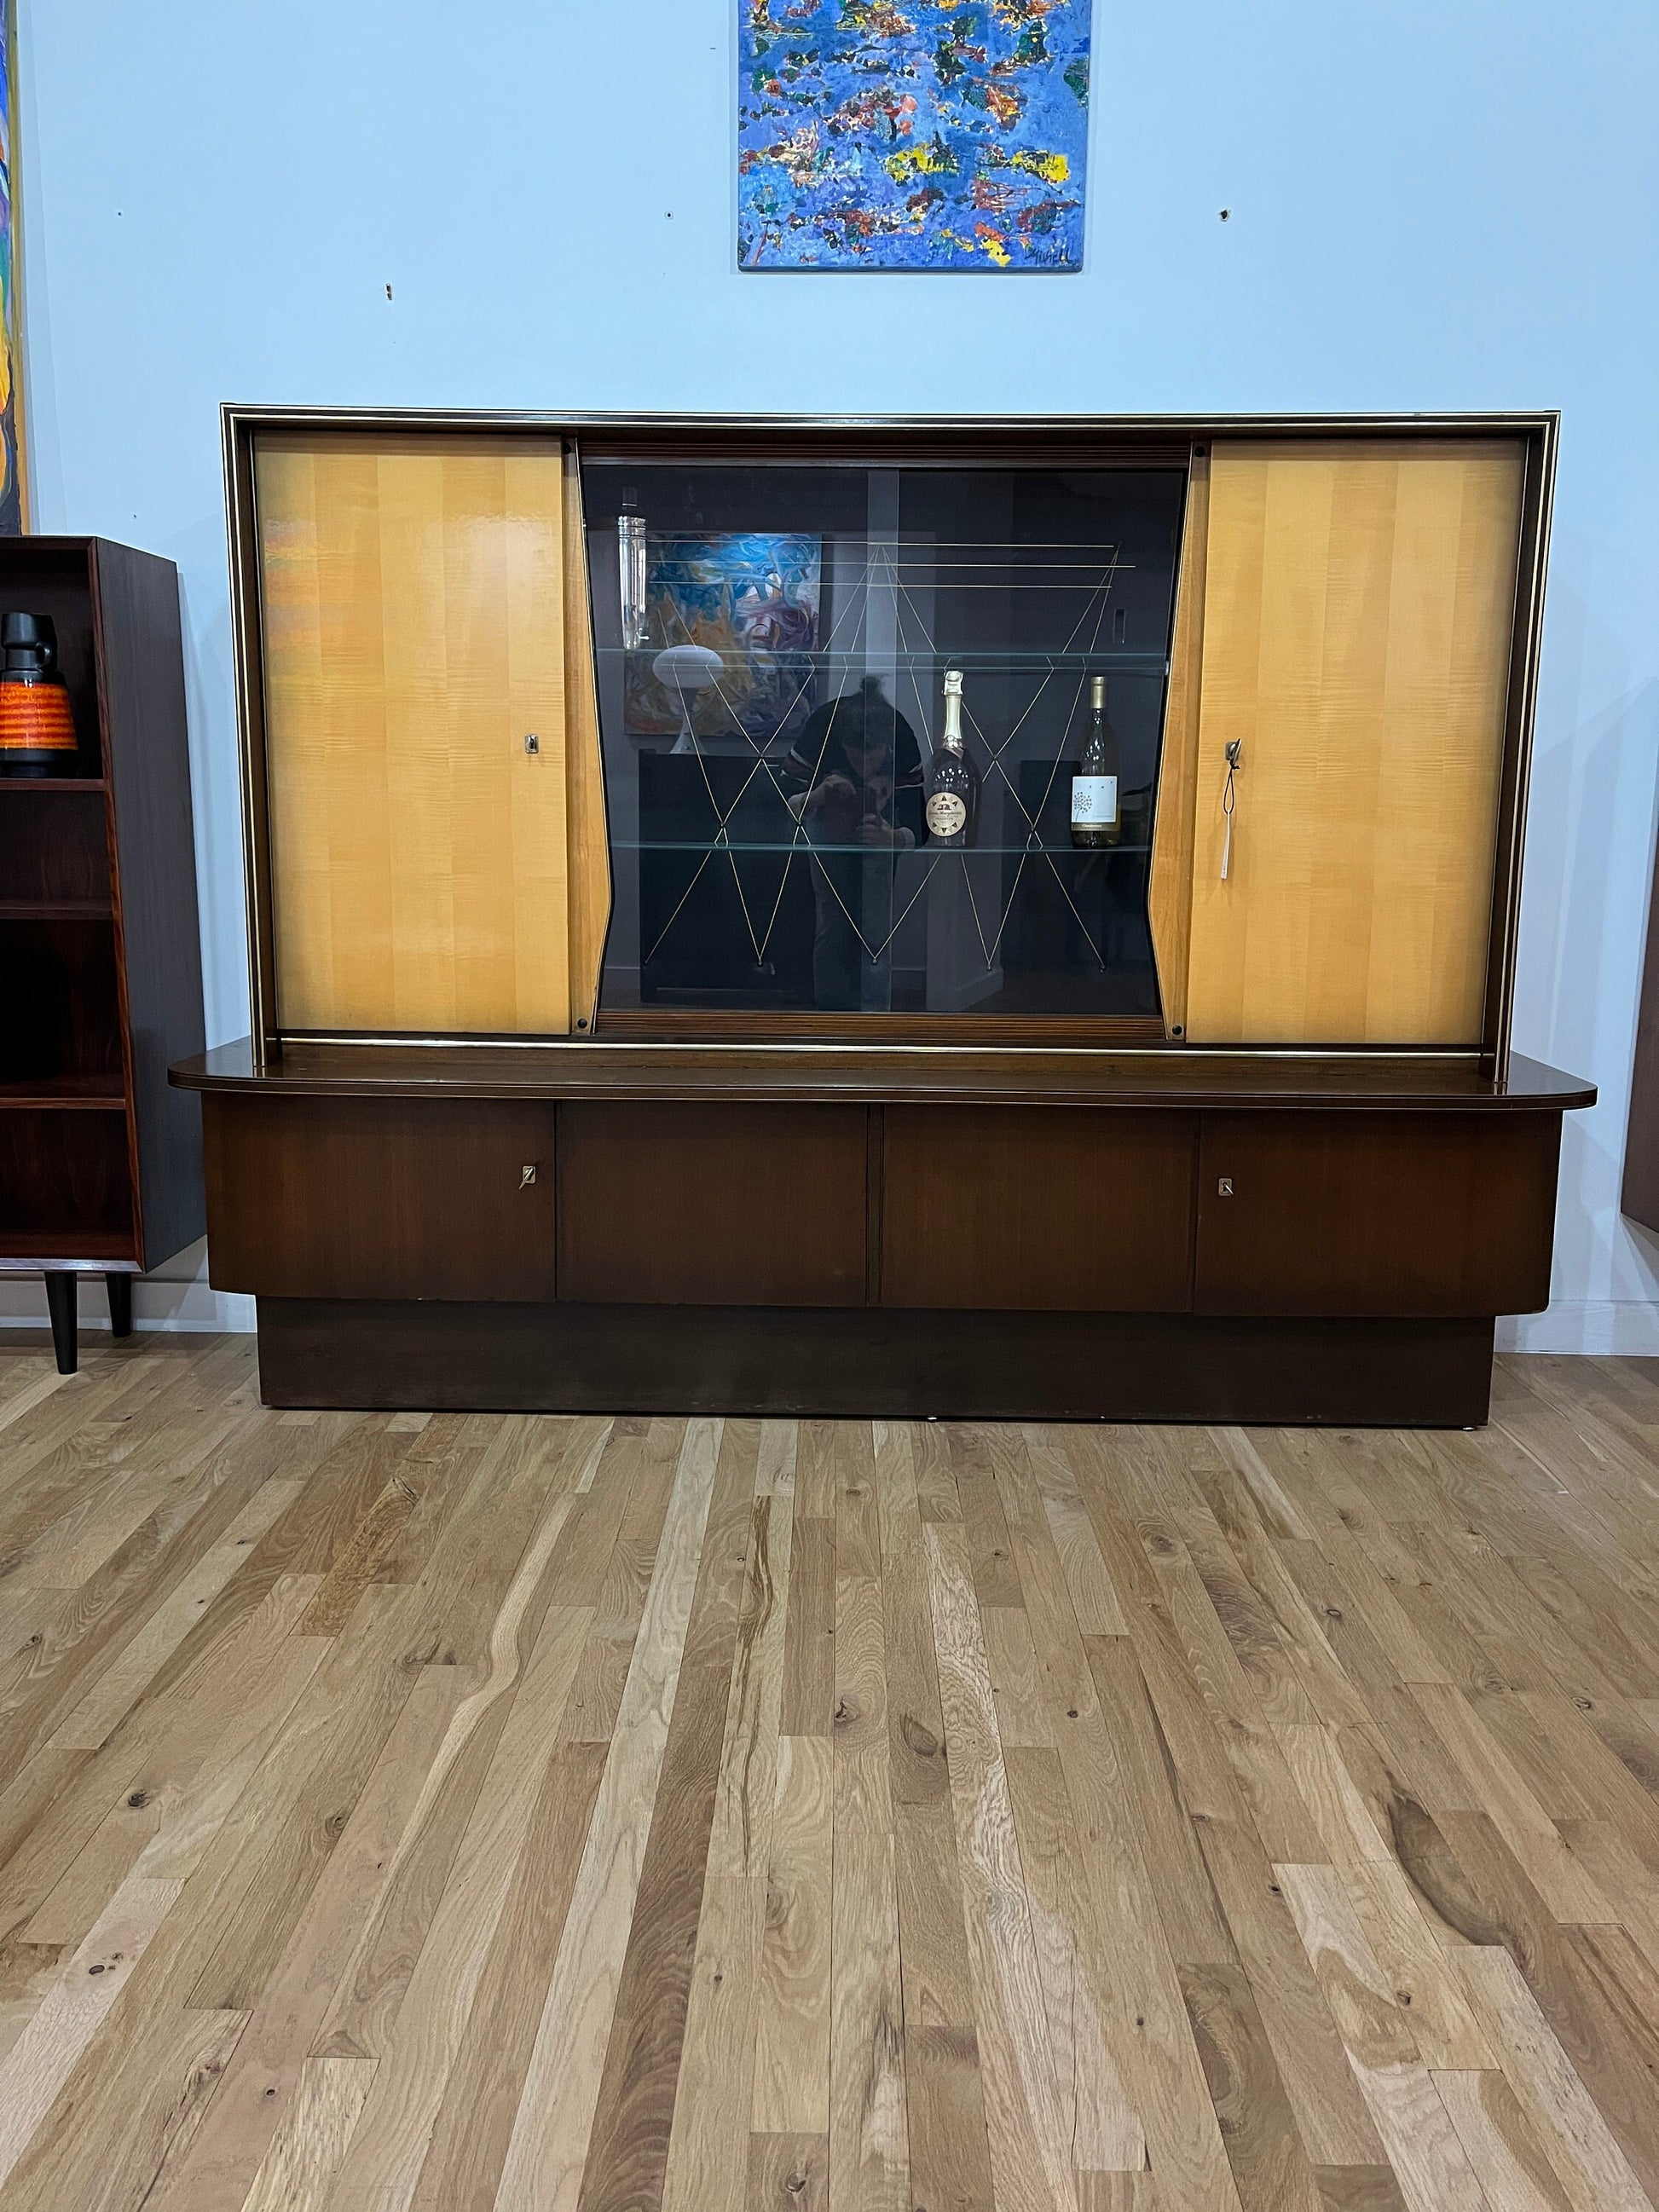 Mid-century high glass China cabinet sideboard